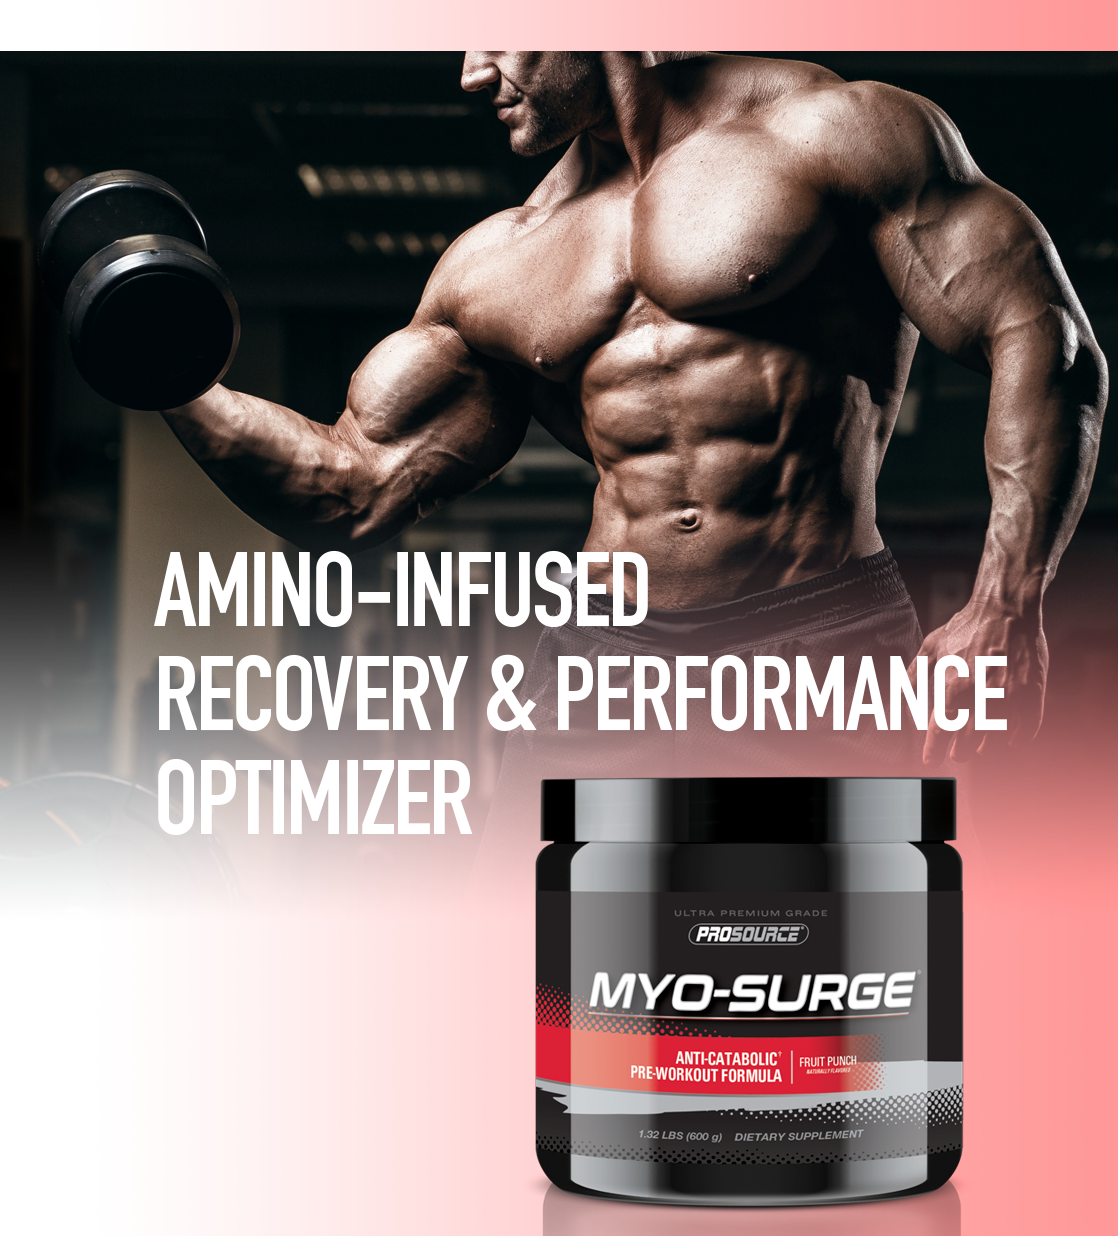 Amino-Infused Recovery & Performance Optimizer